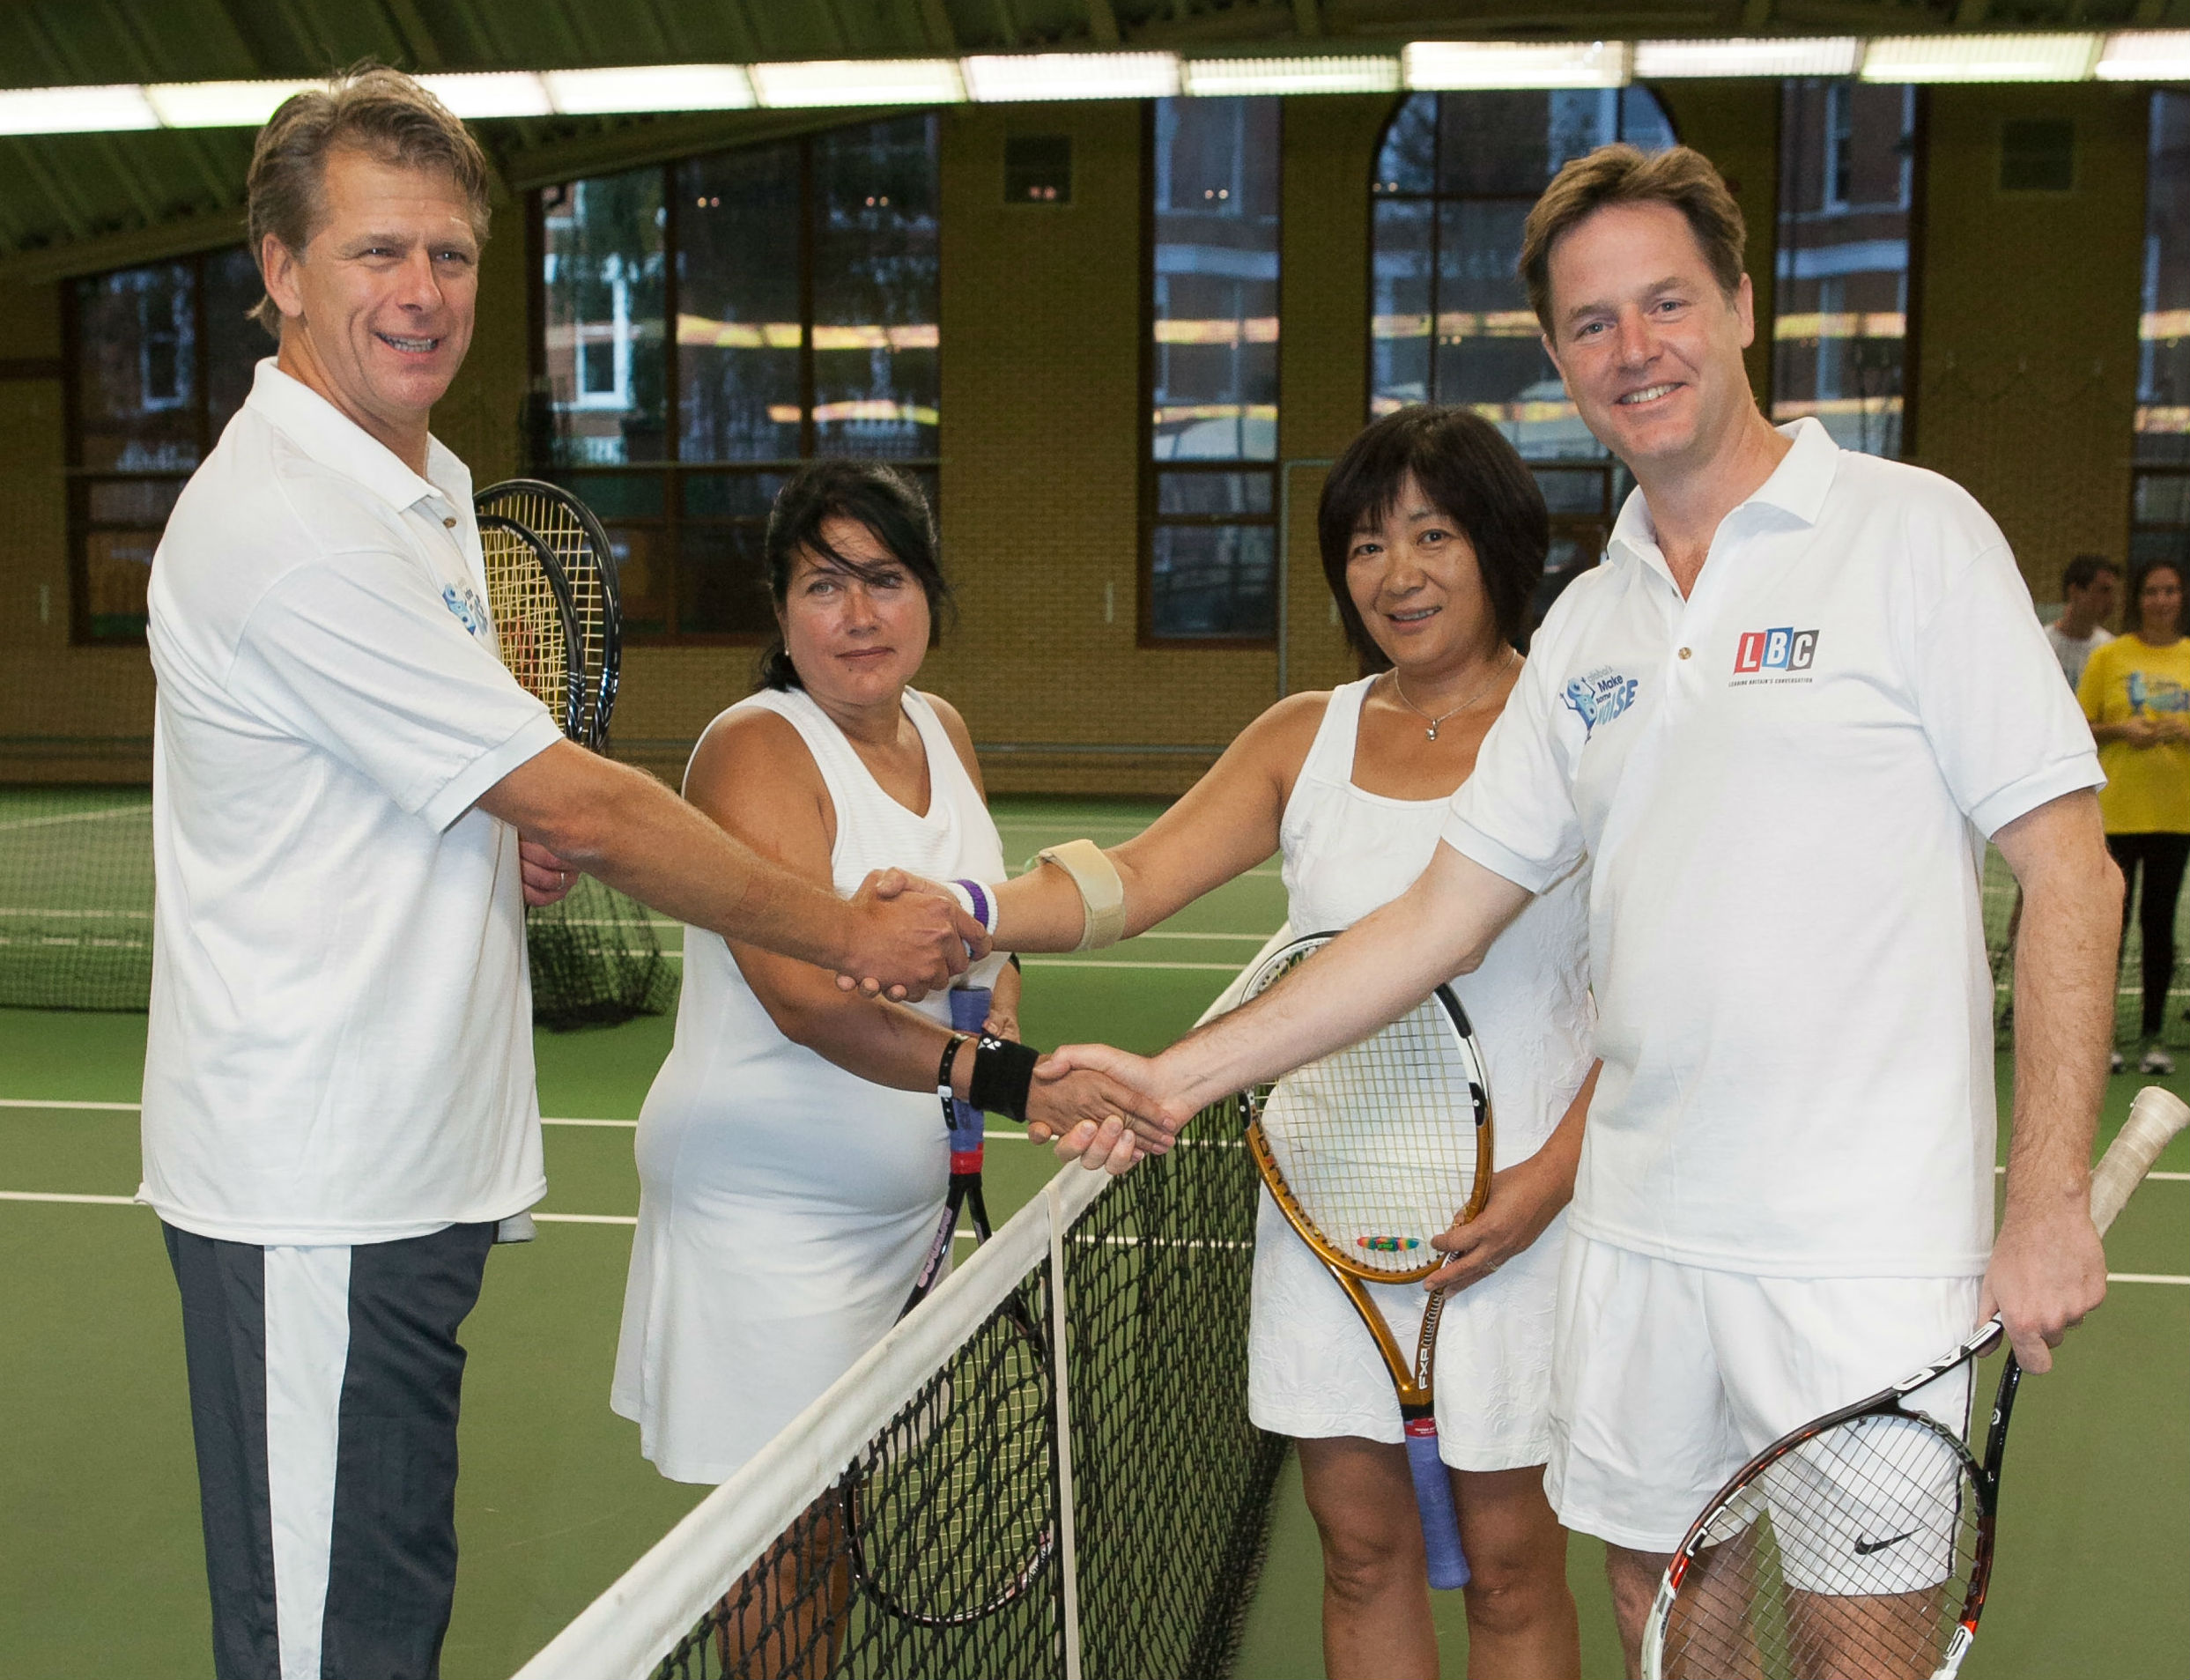 Nick Clegg defeated by Andrew Castle in Global's Make Some Noise tennis match!